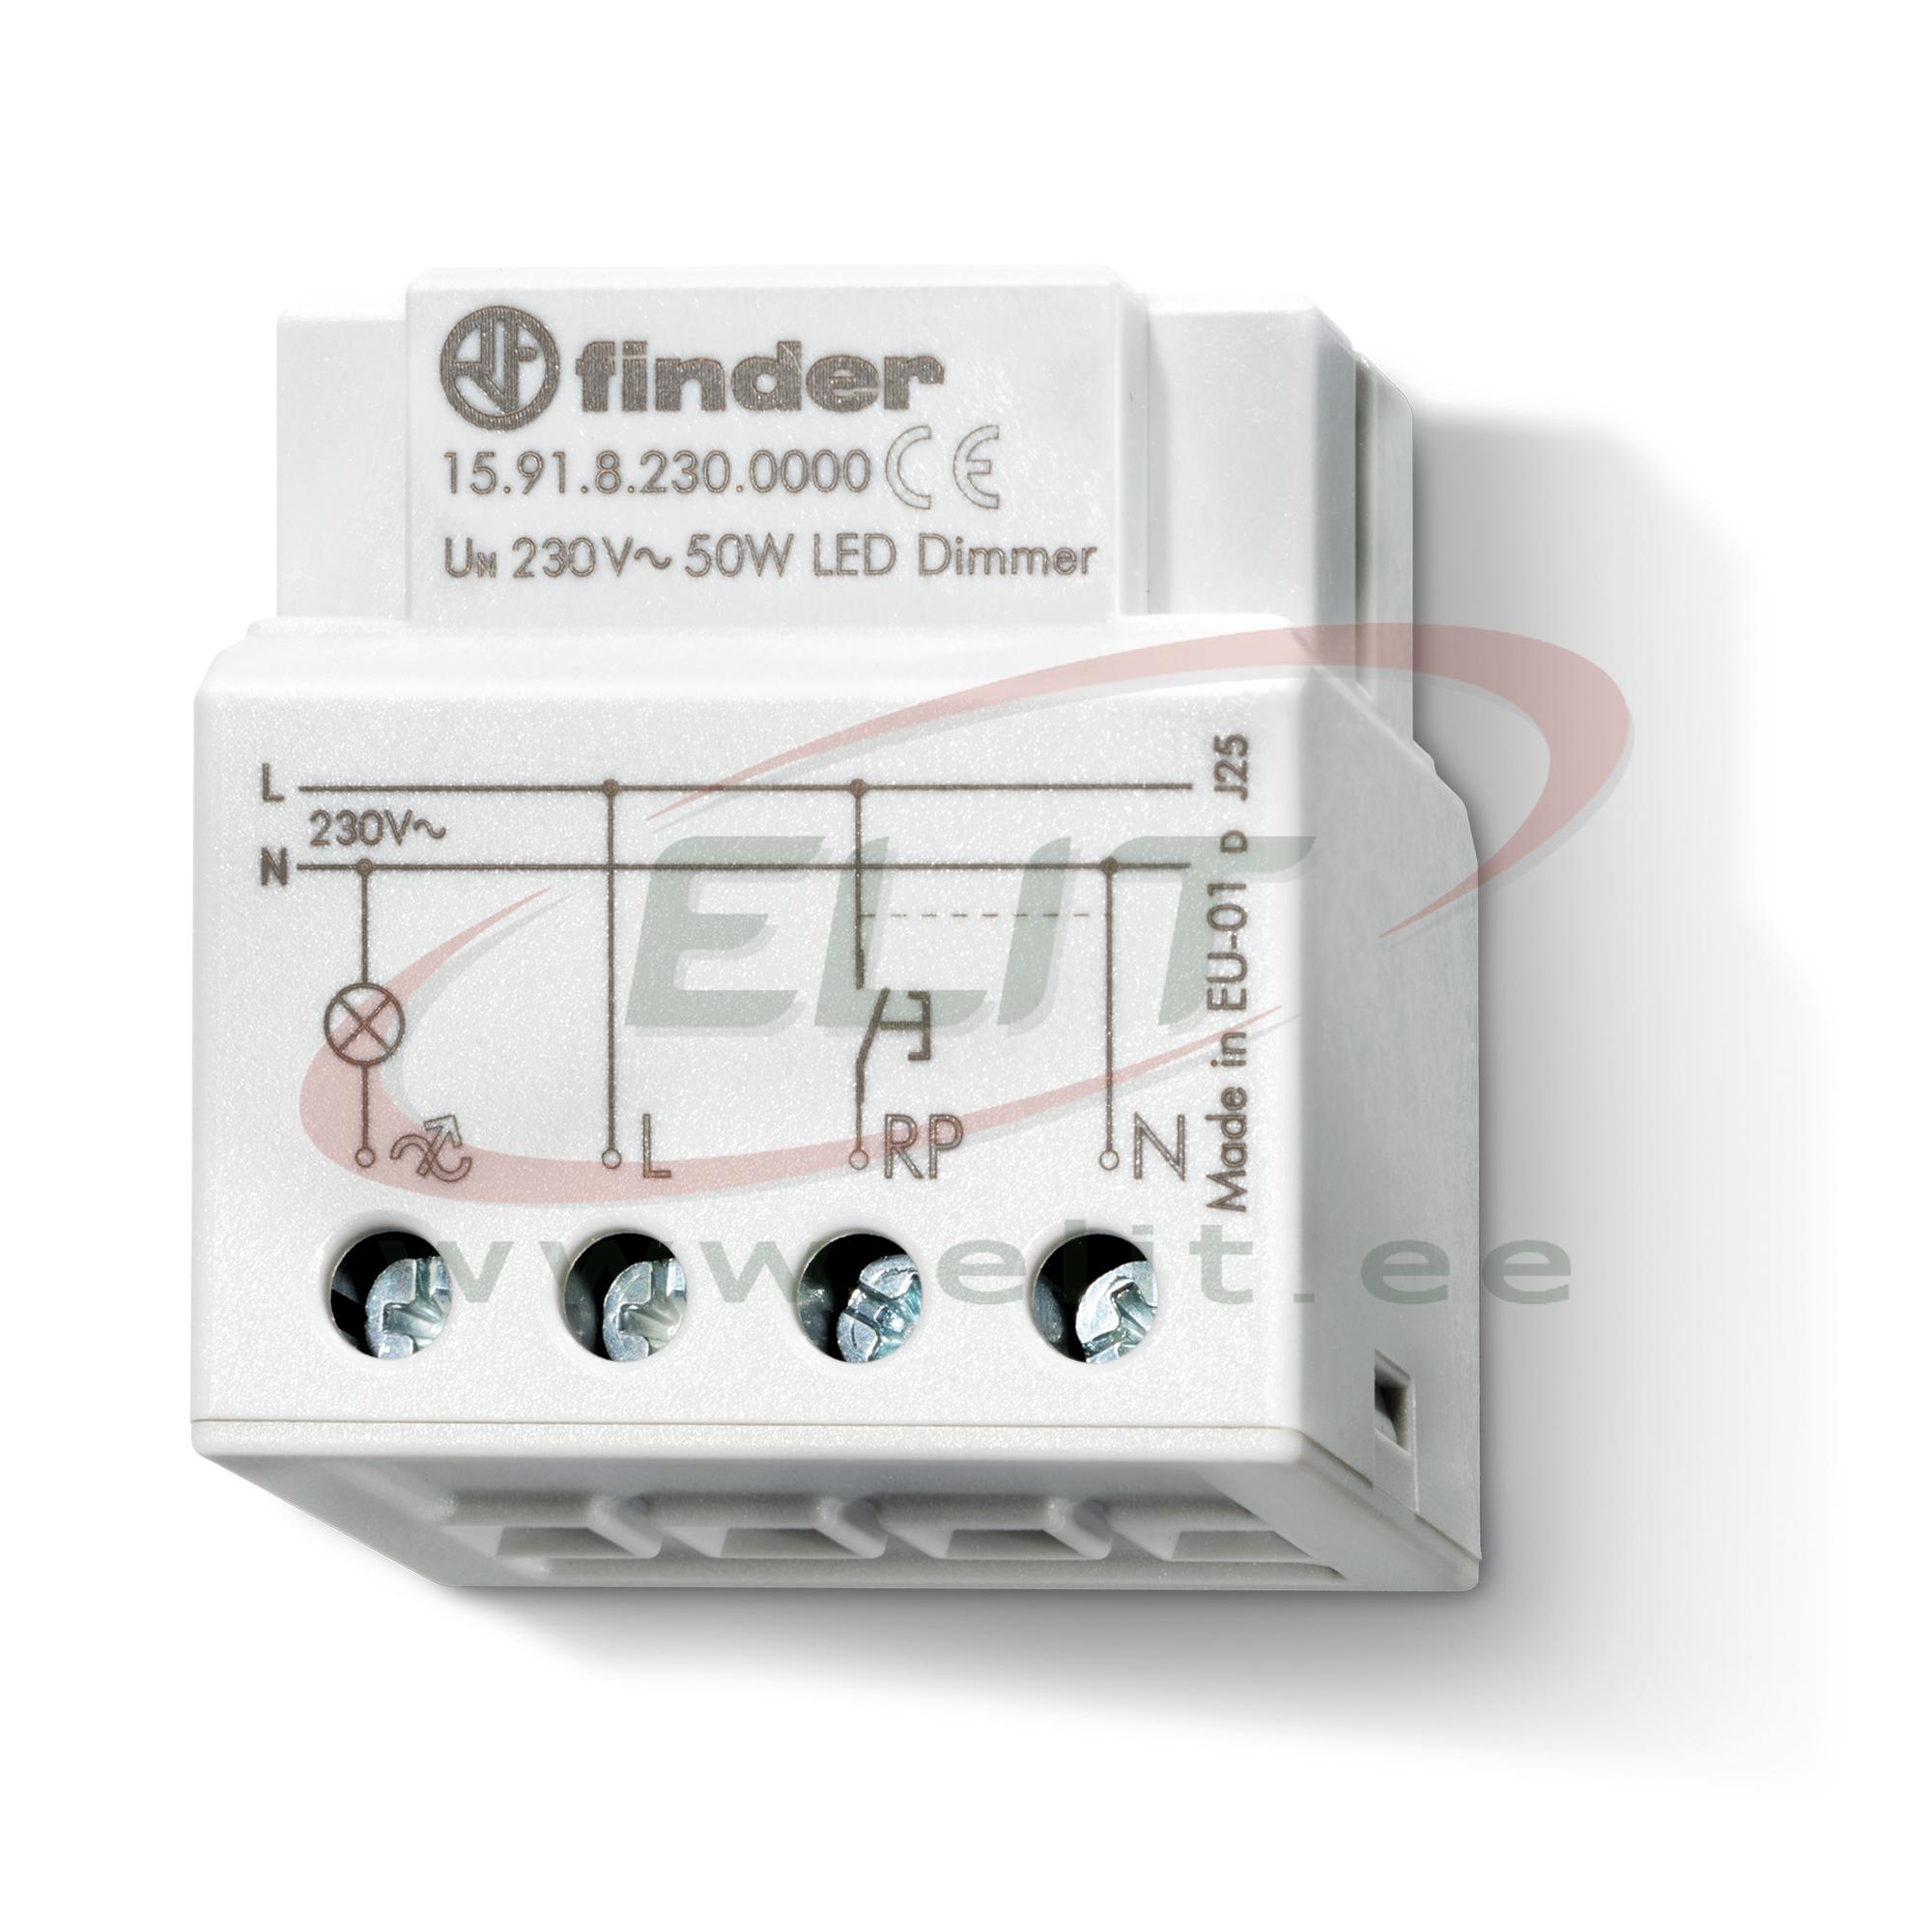 pijn samenkomen luister 159182300000 Dimmer 15.91, 1NO 100W 230V 45..65Hz, 50W LED, linear  regulation, built-in box mounting, Finder Elit GlobalStore™ - Electrical  and automation components, PLC, HMI Distributor